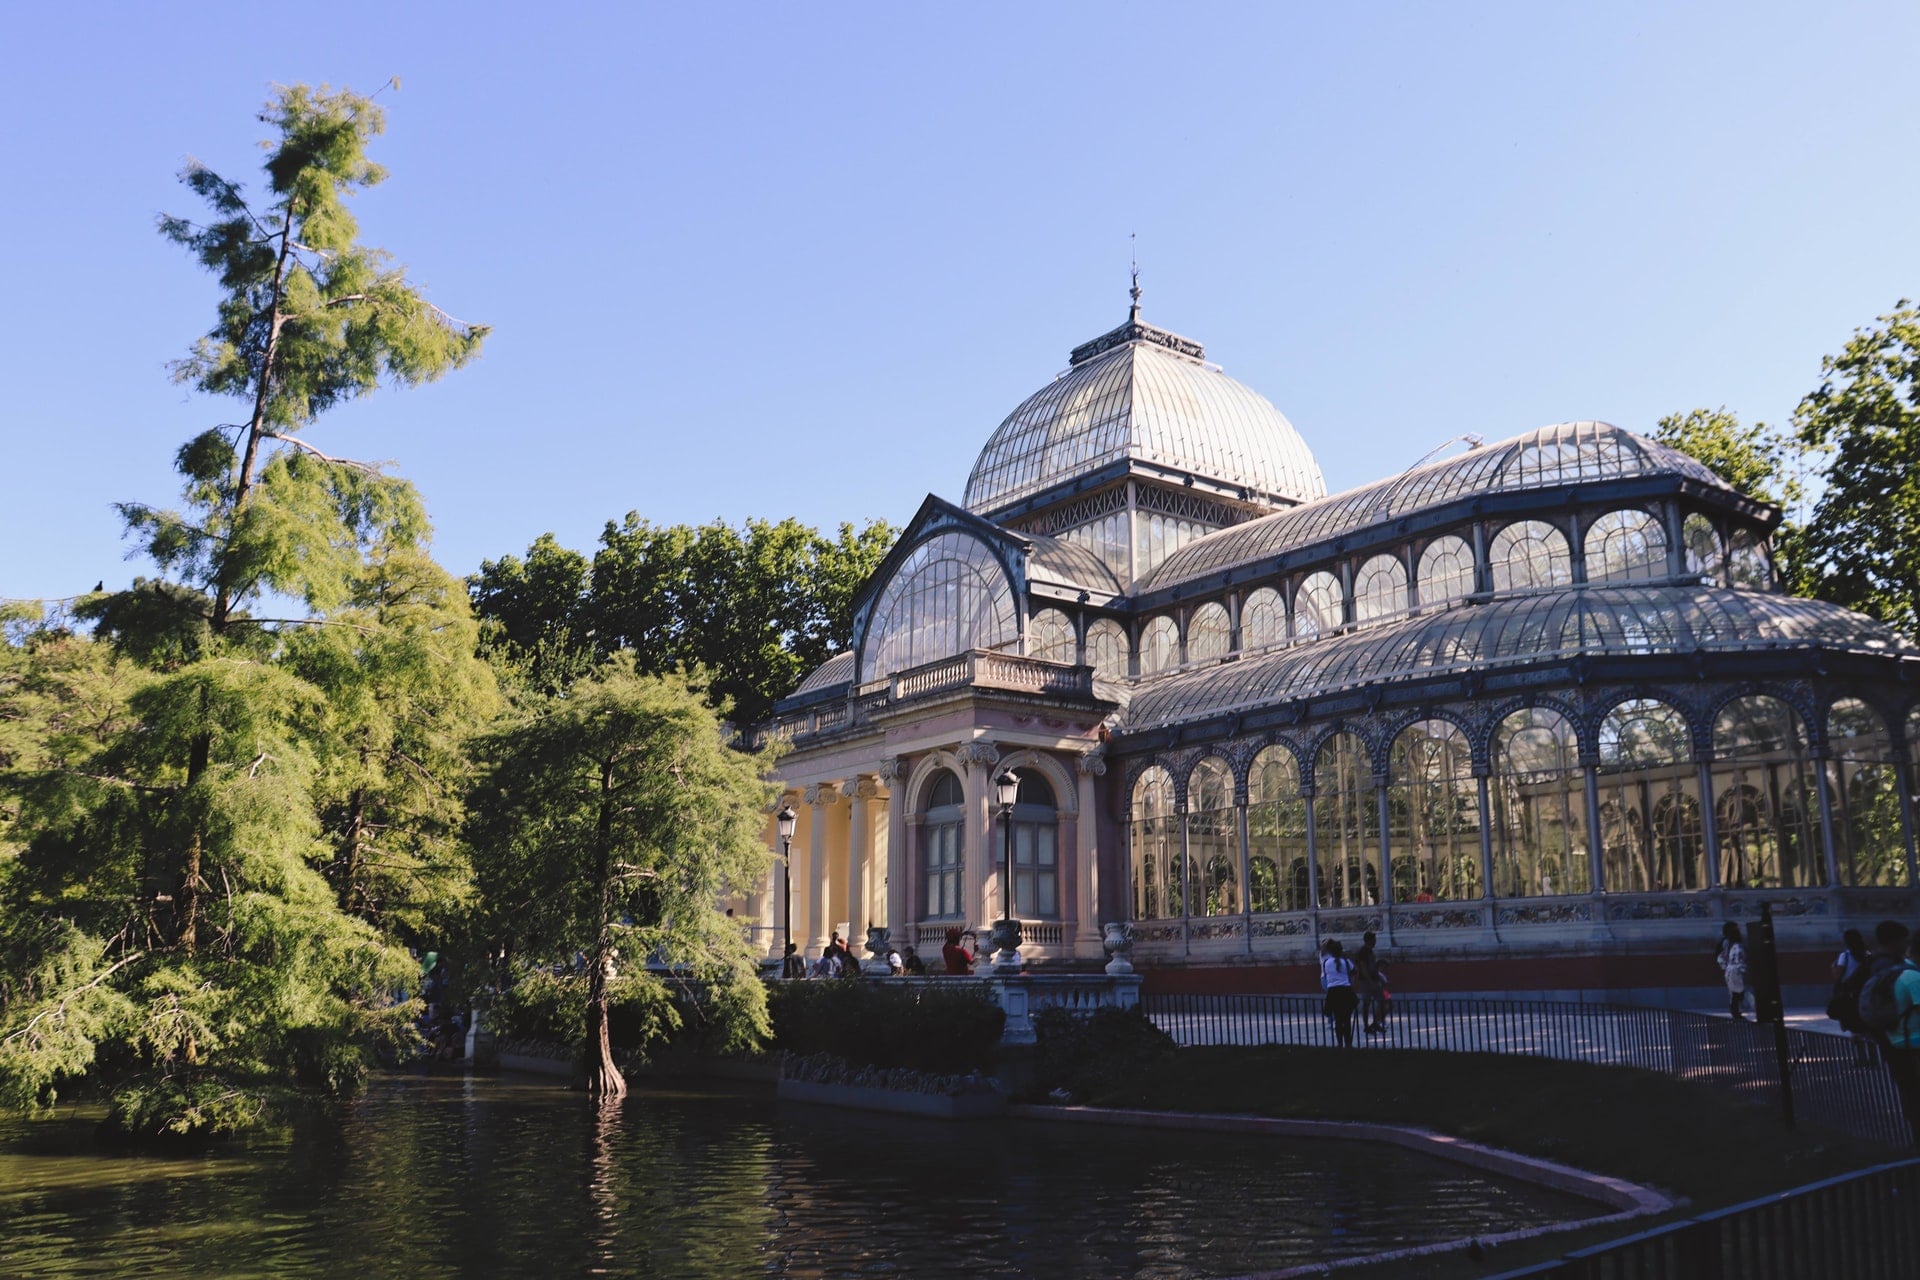 glasshouse-in-park-on-a-sunny-day-by-a-pond-and-trees-in-el-retiro-park-madrid